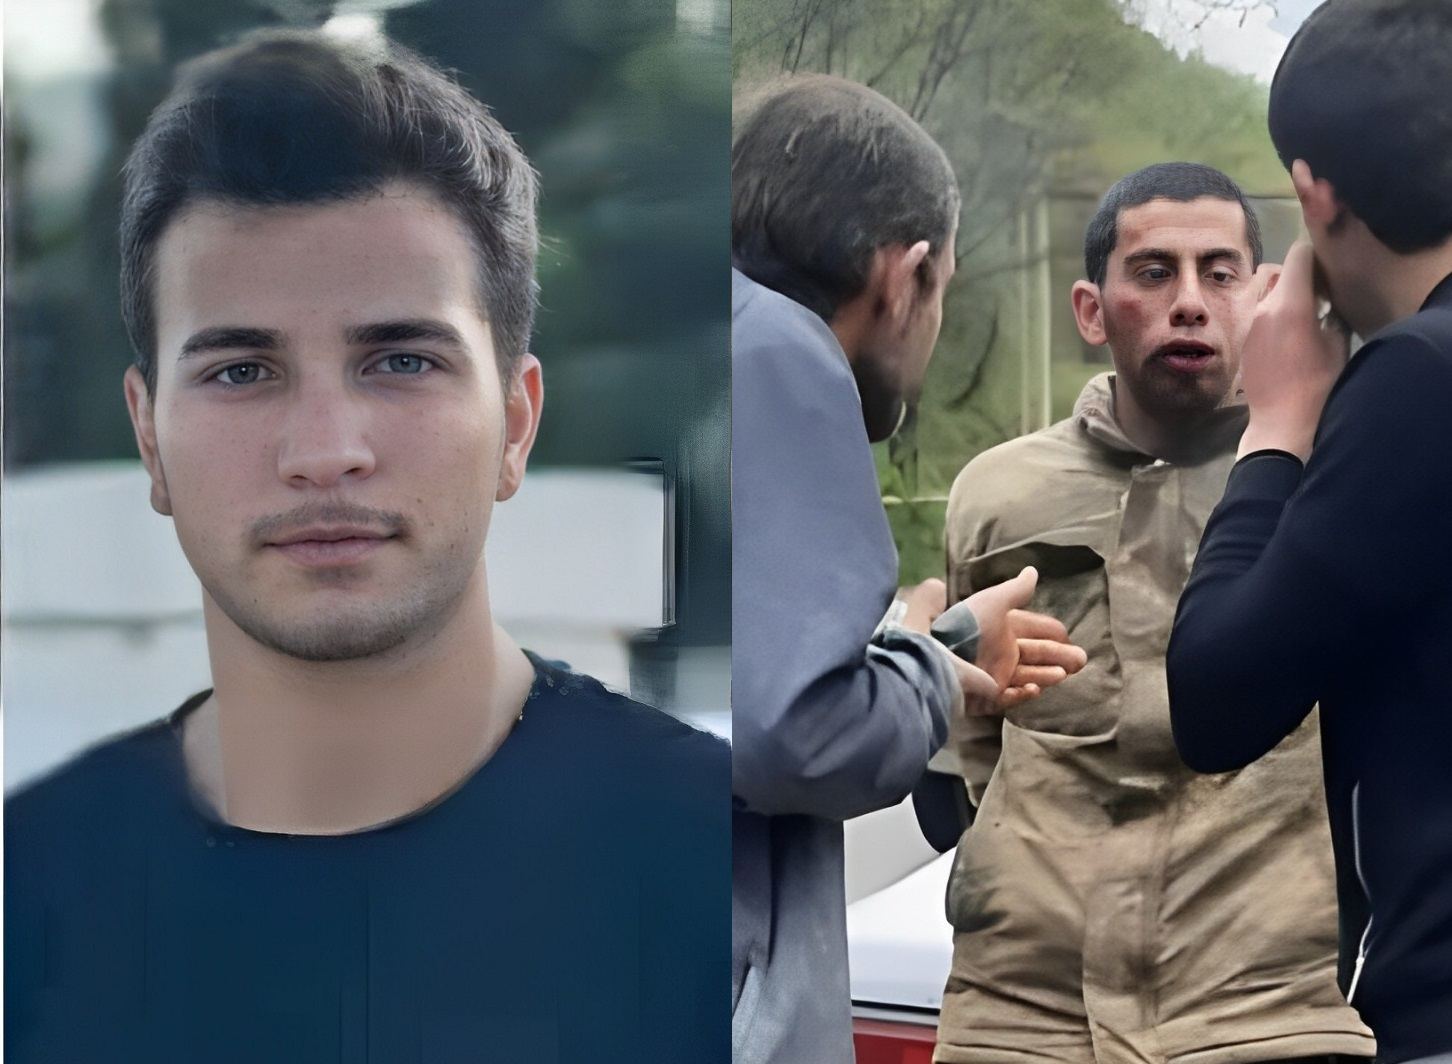 ICRC employees visit two Azerbaijani soldiers held captive in Armenia